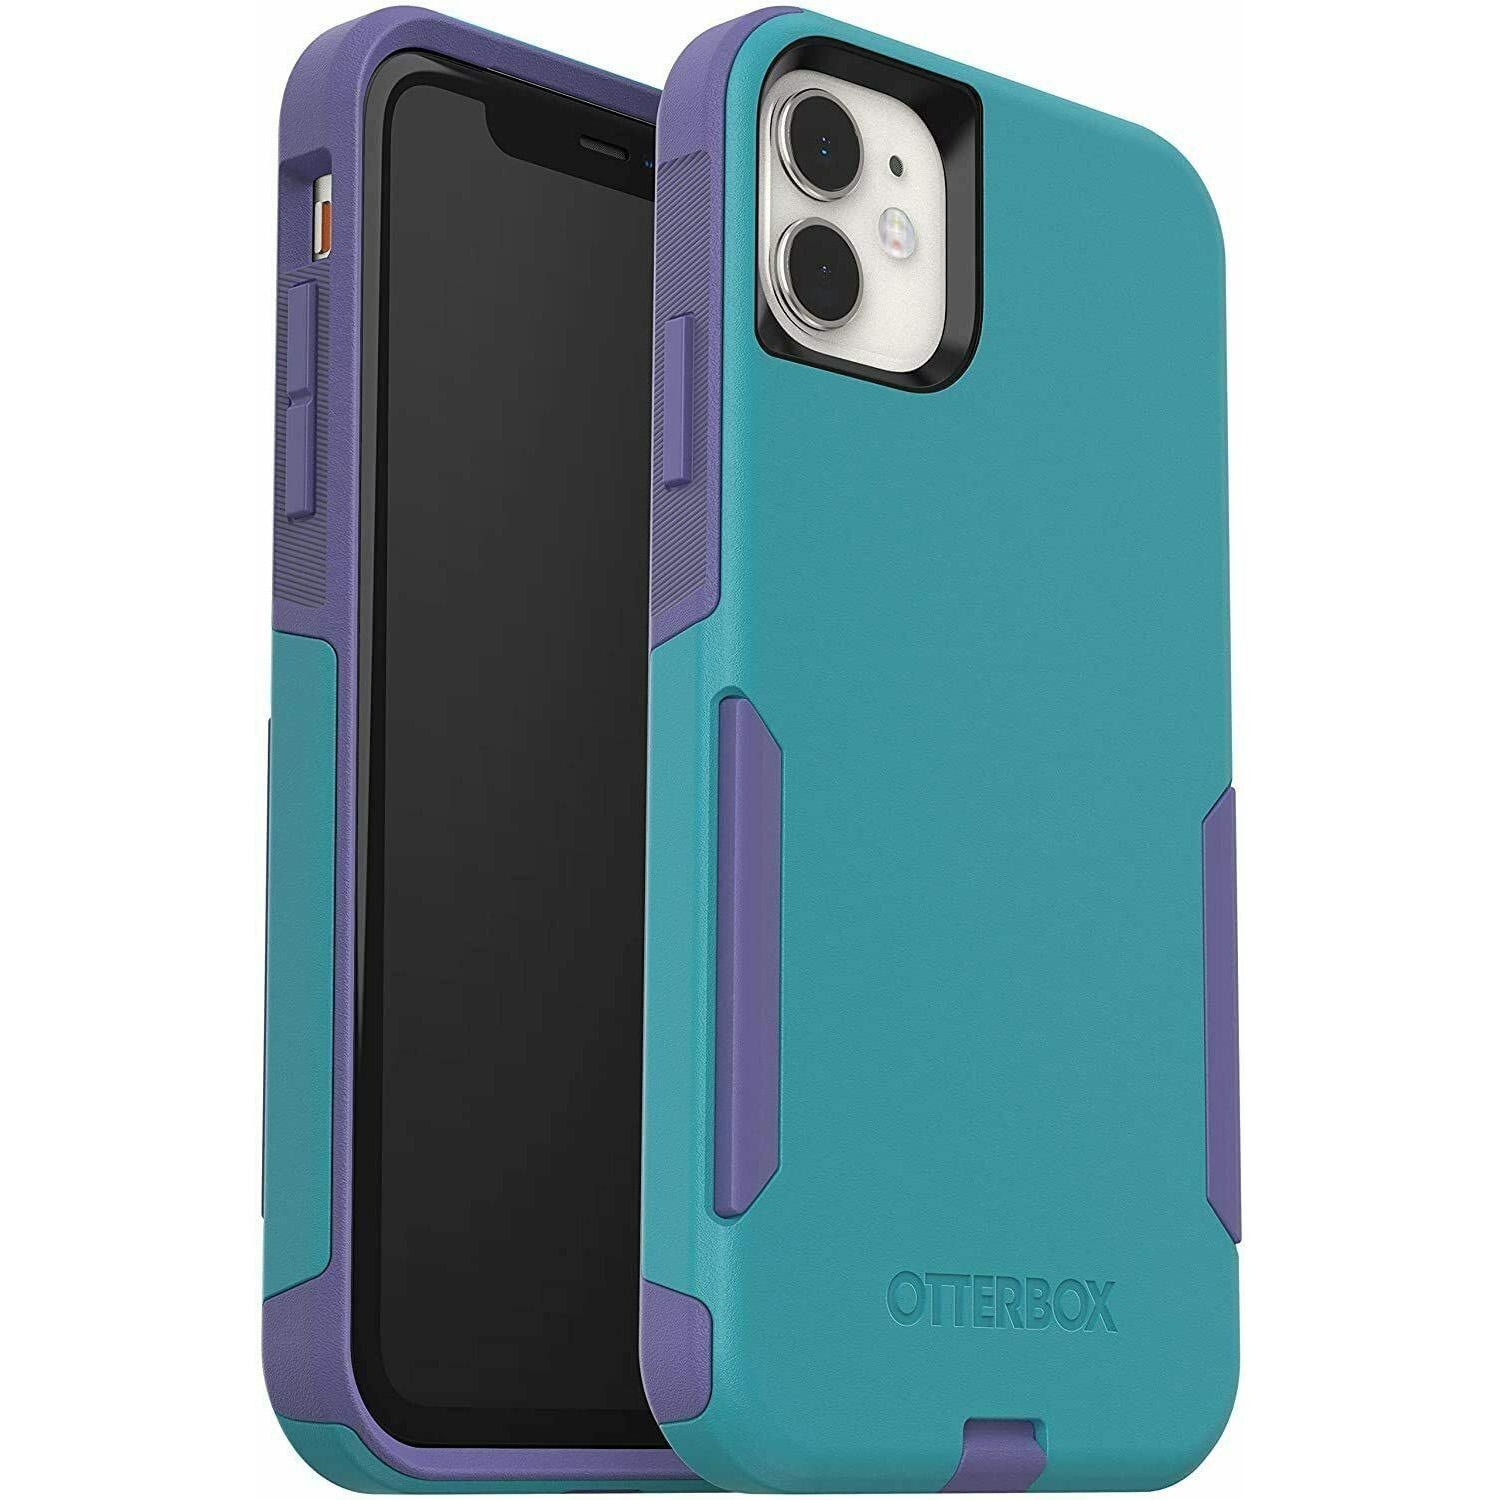 iPhone 11 OtterBox Commuter Series Compact Case for $14.95 Shipped